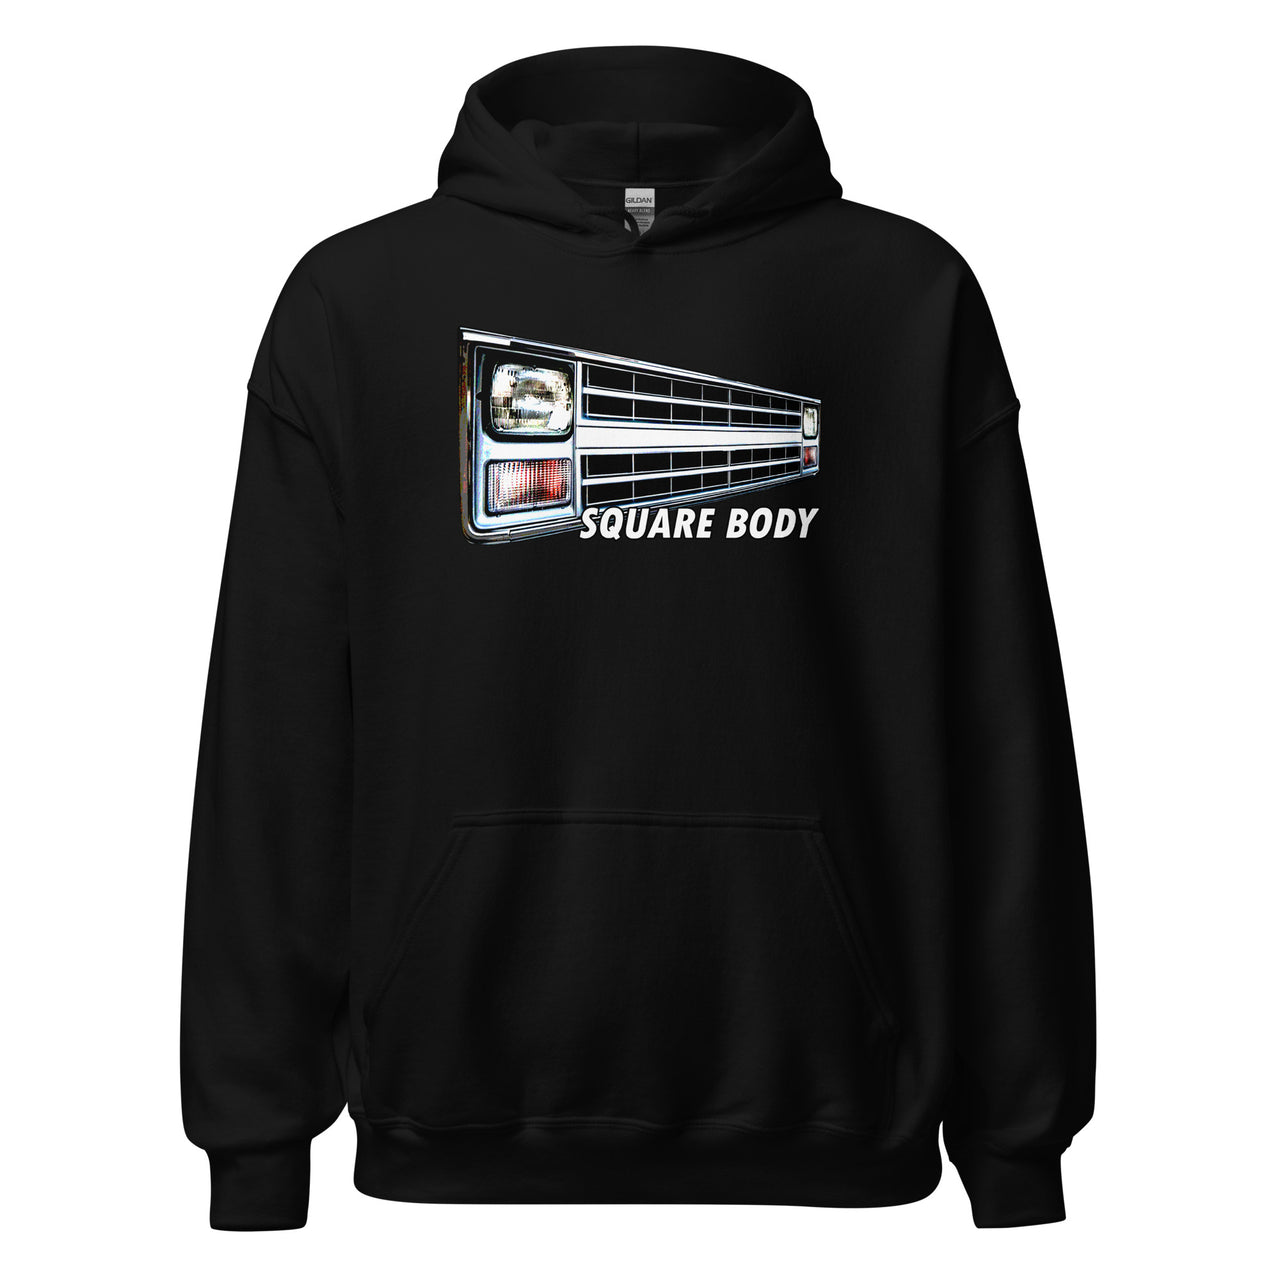 Square Body Truck 80s Angled Grille Hoodie in black